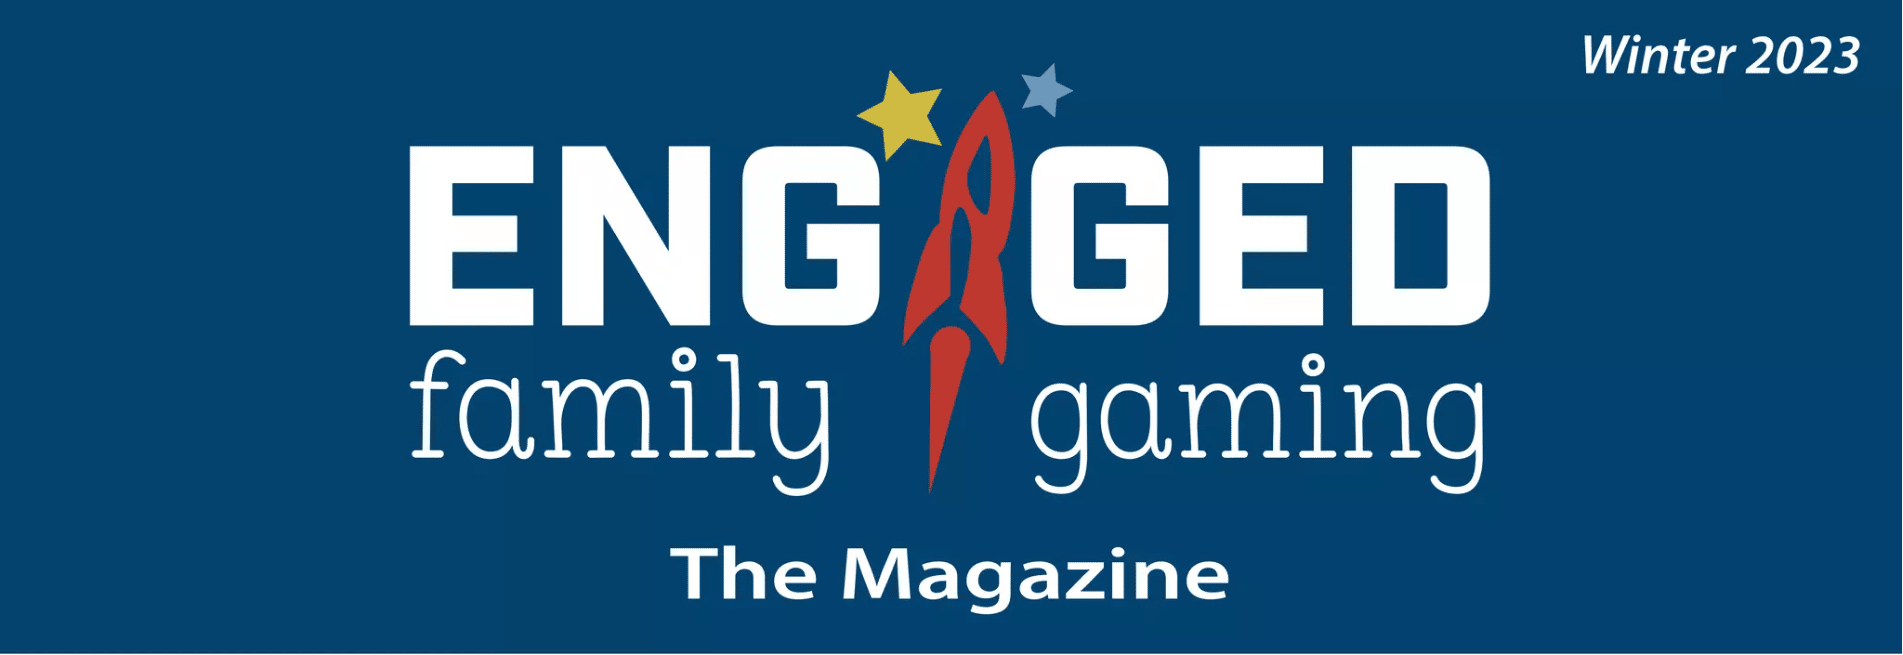 This is the header for the Winter 2023 issue of the EFG Magazine. It is a blue banner with the Engaged Family Gaming logo prominently displayed.